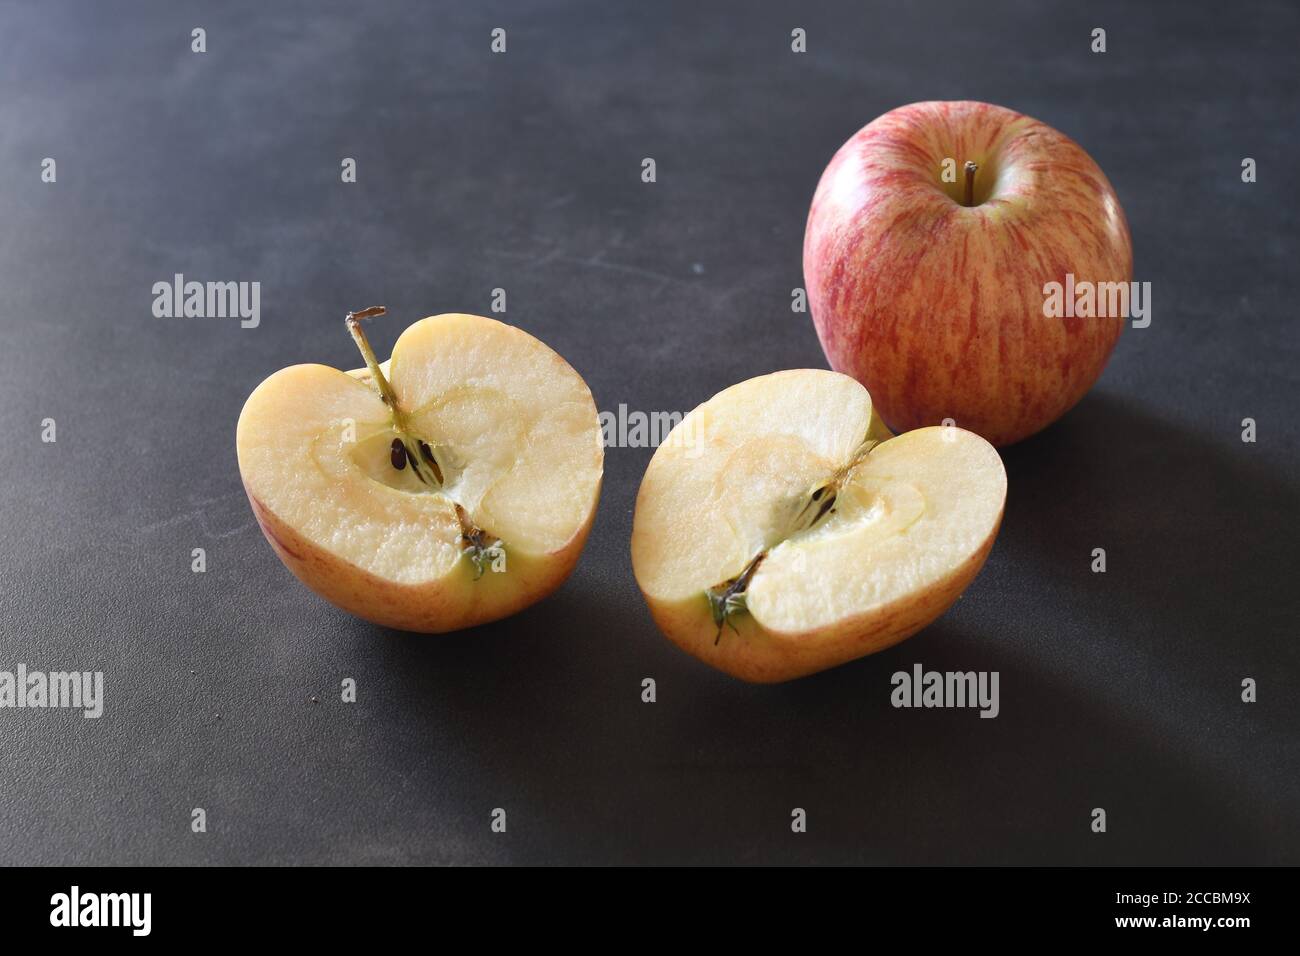 Apple cut in two halves and a full apple Stock Photo